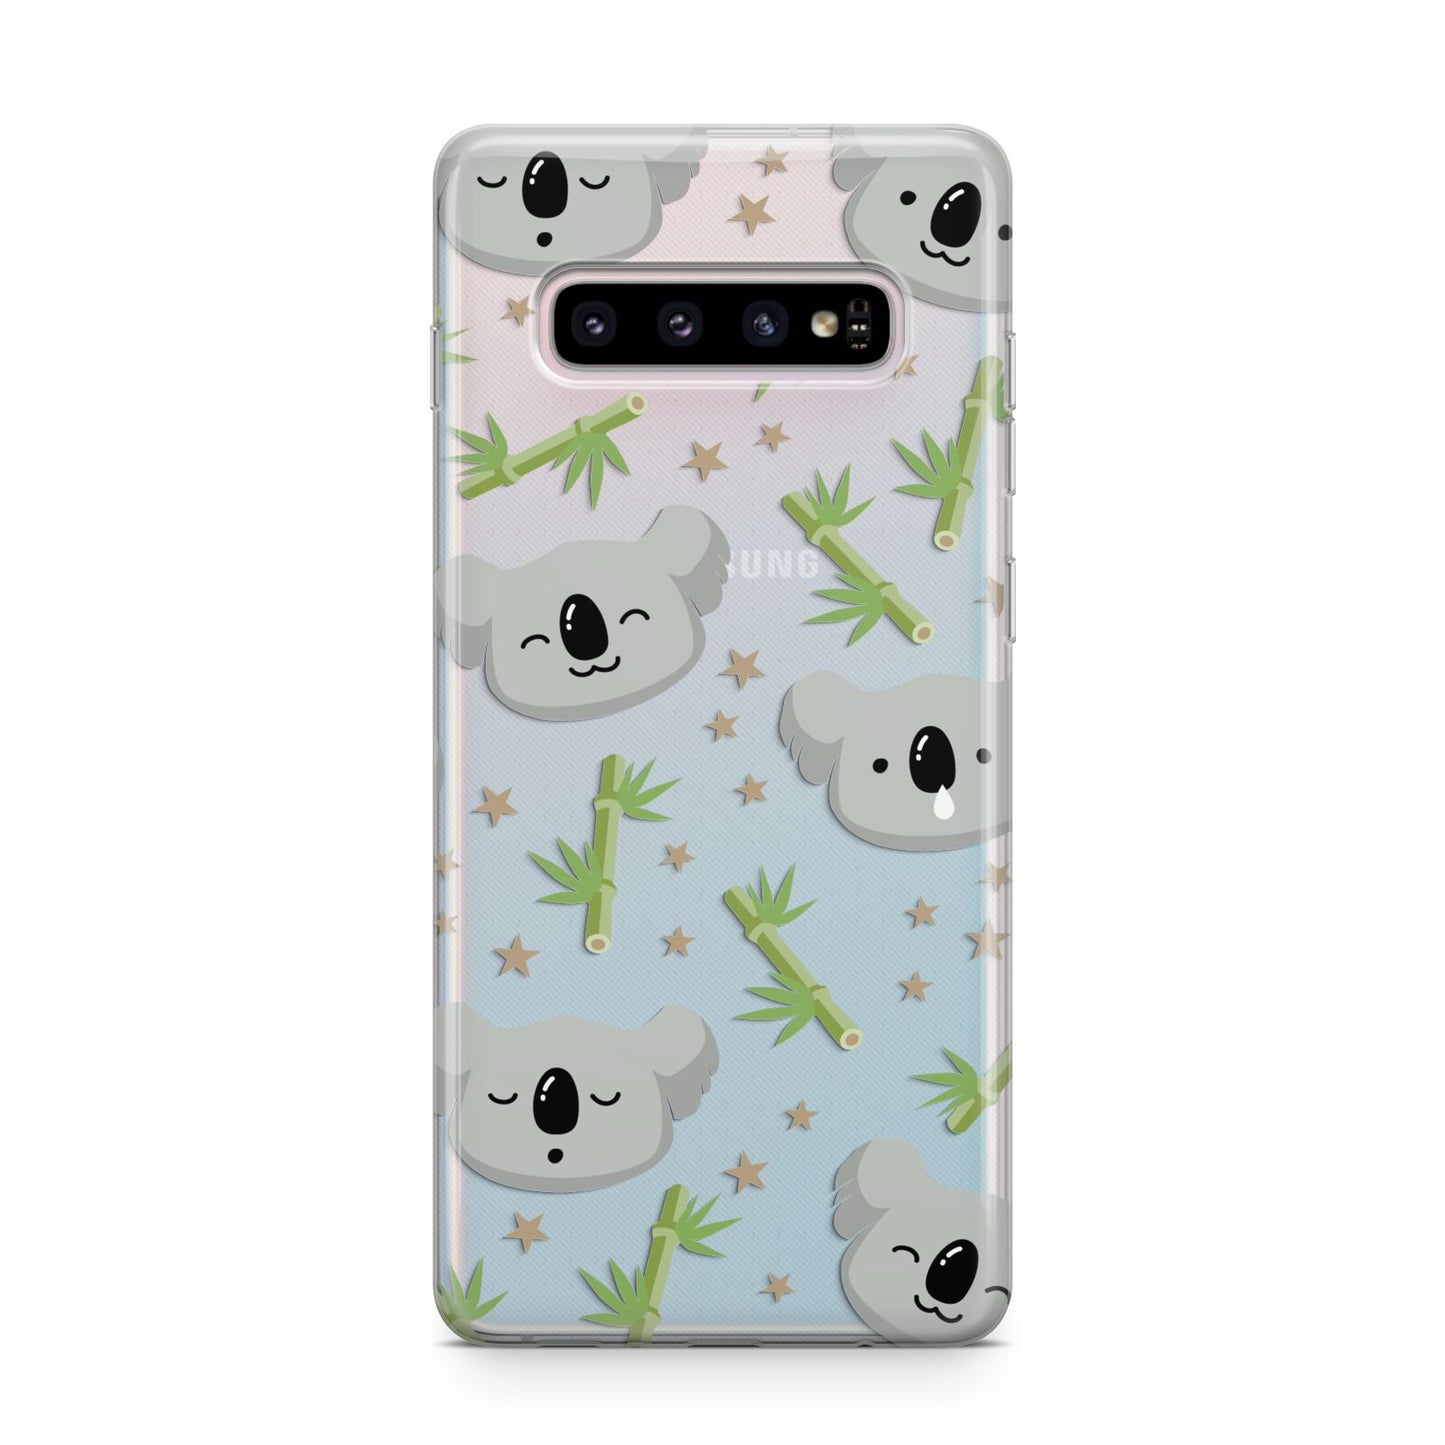 Koala Faces with Transparent Background Samsung Galaxy S10 Plus Case